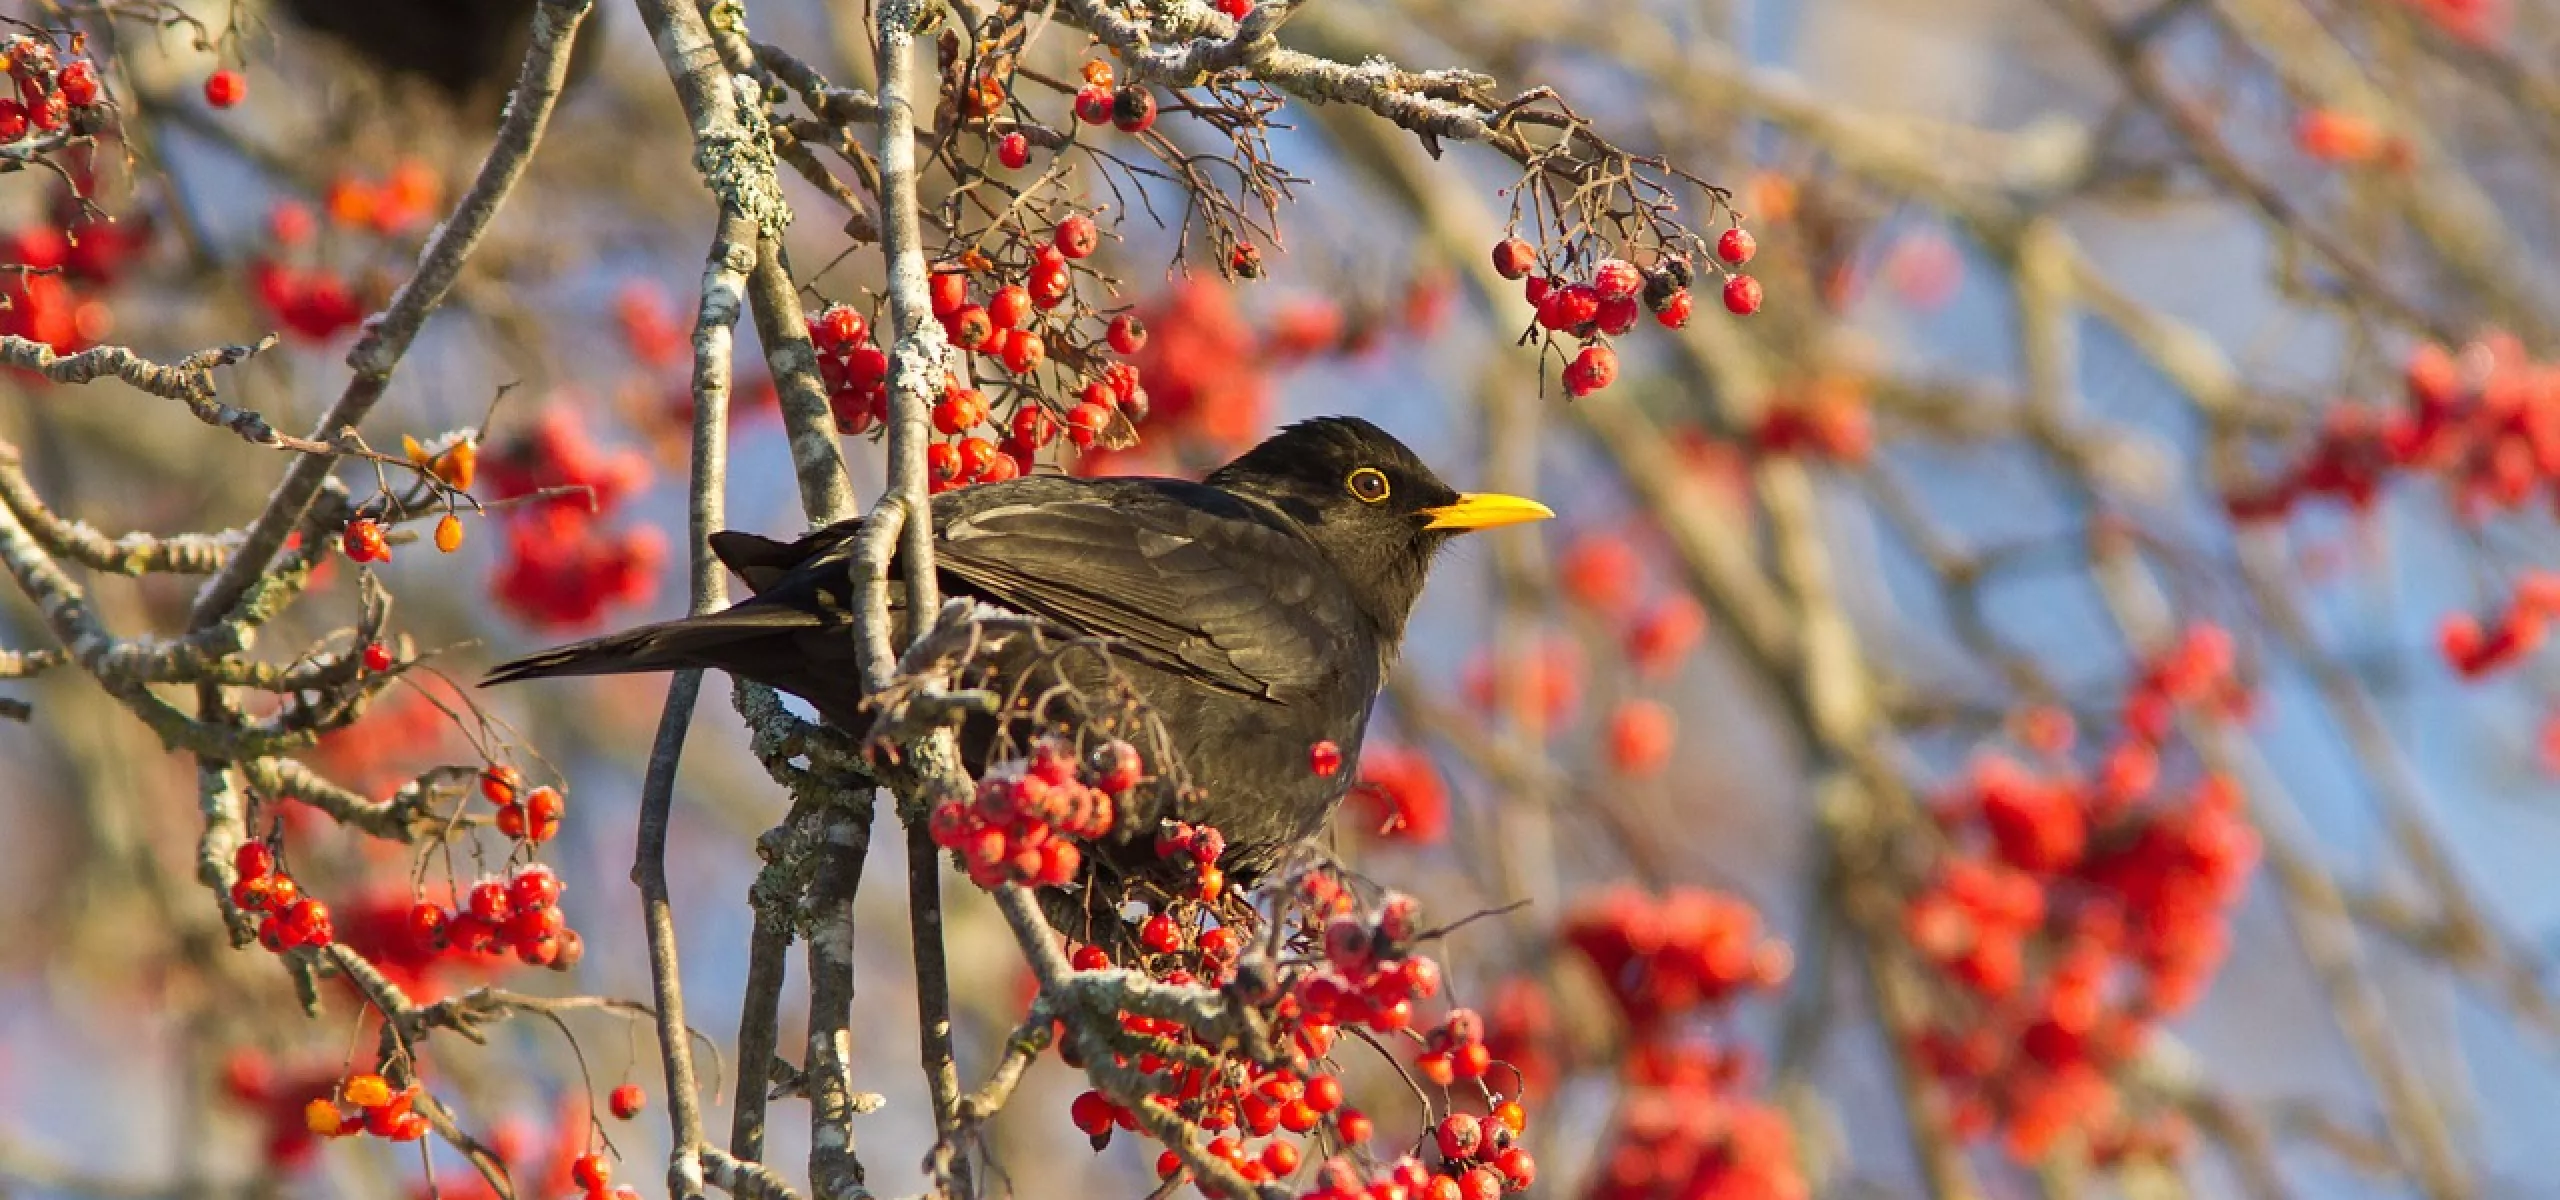 Blackbird in a tree with red berries